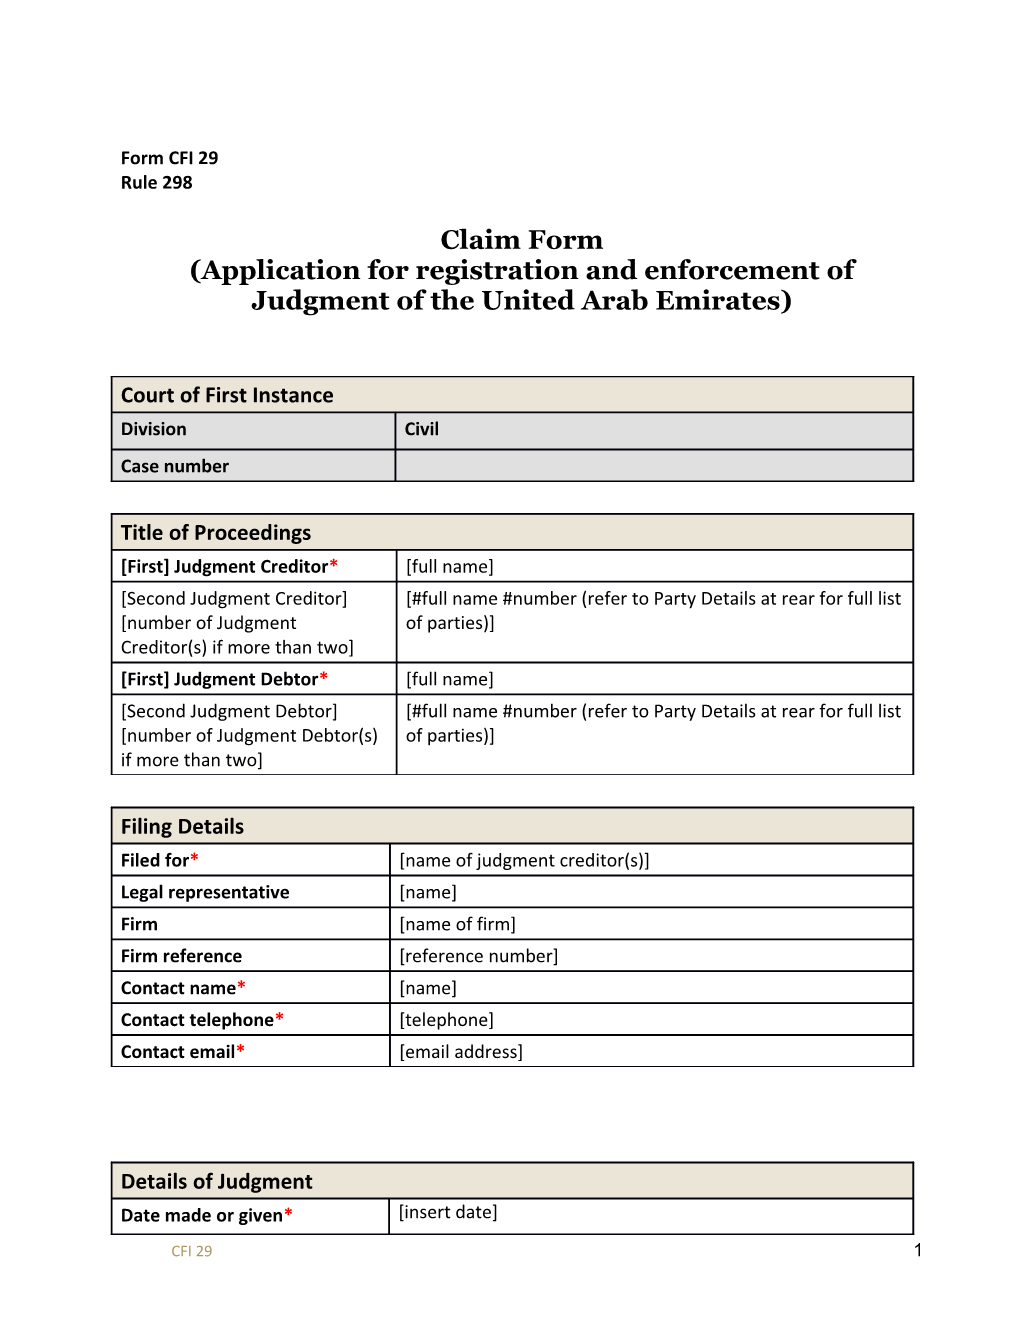 Claim Form (Applicationfor Registration and Enforcement of Judgment of the United Arab